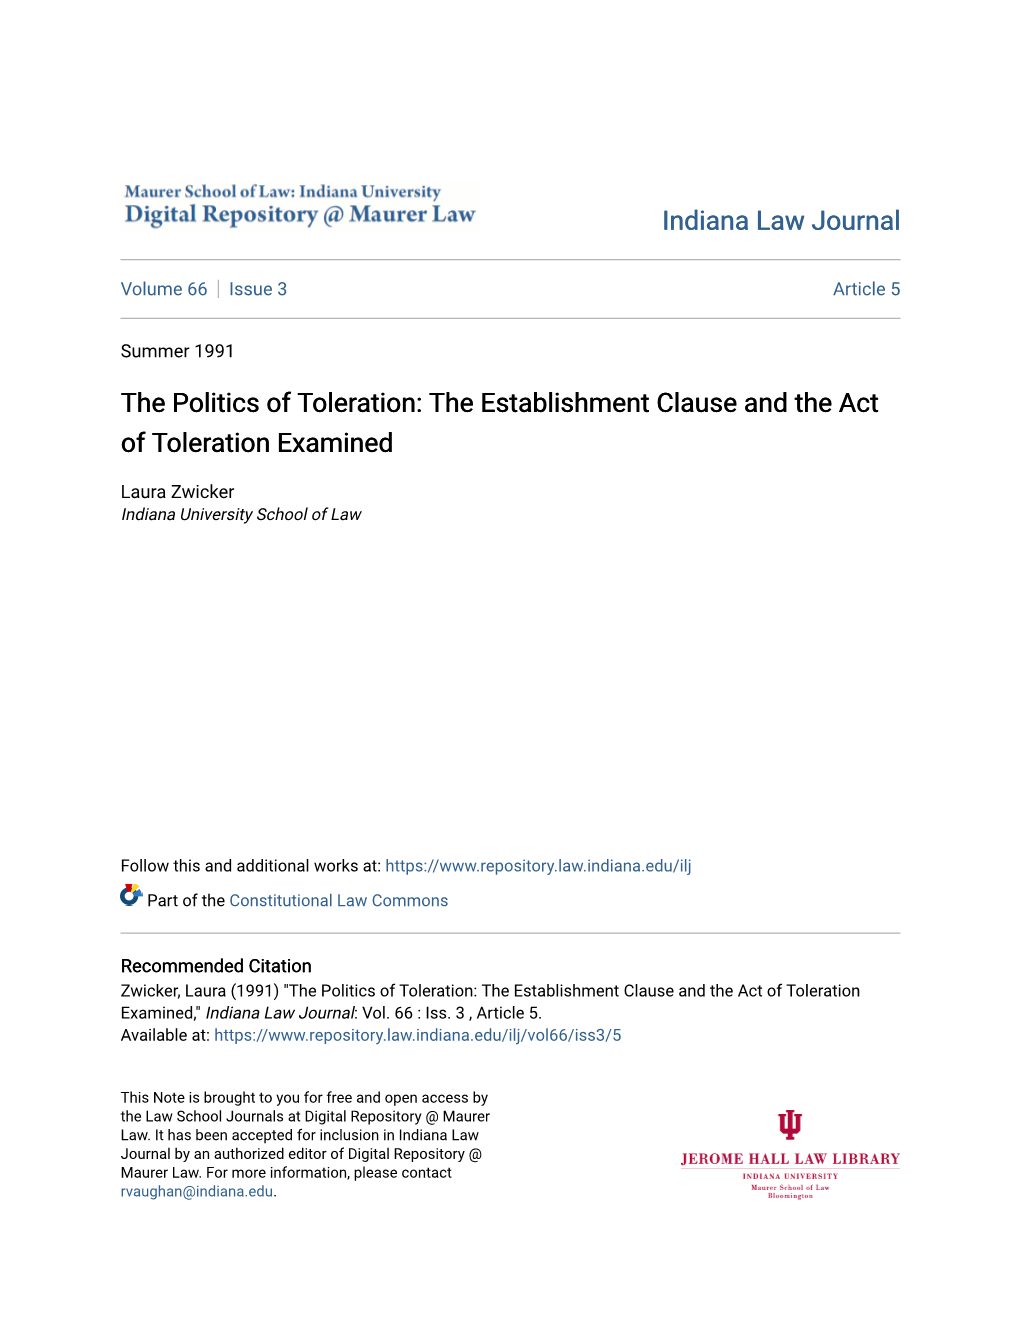 The Establishment Clause and the Act of Toleration Examined